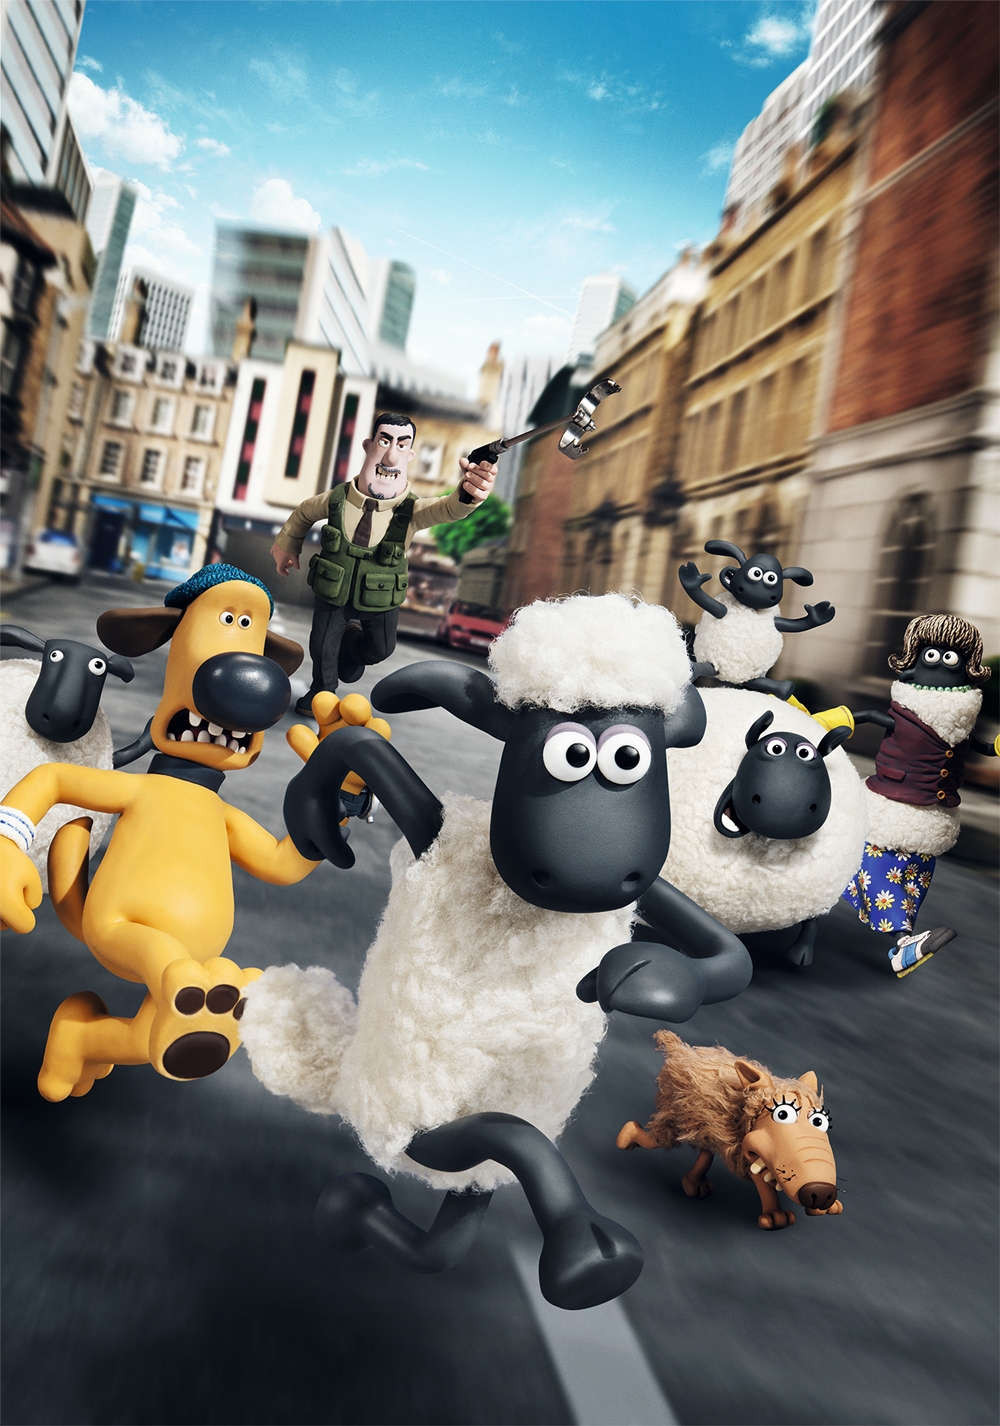 Shaun the Sheep Movie Picture